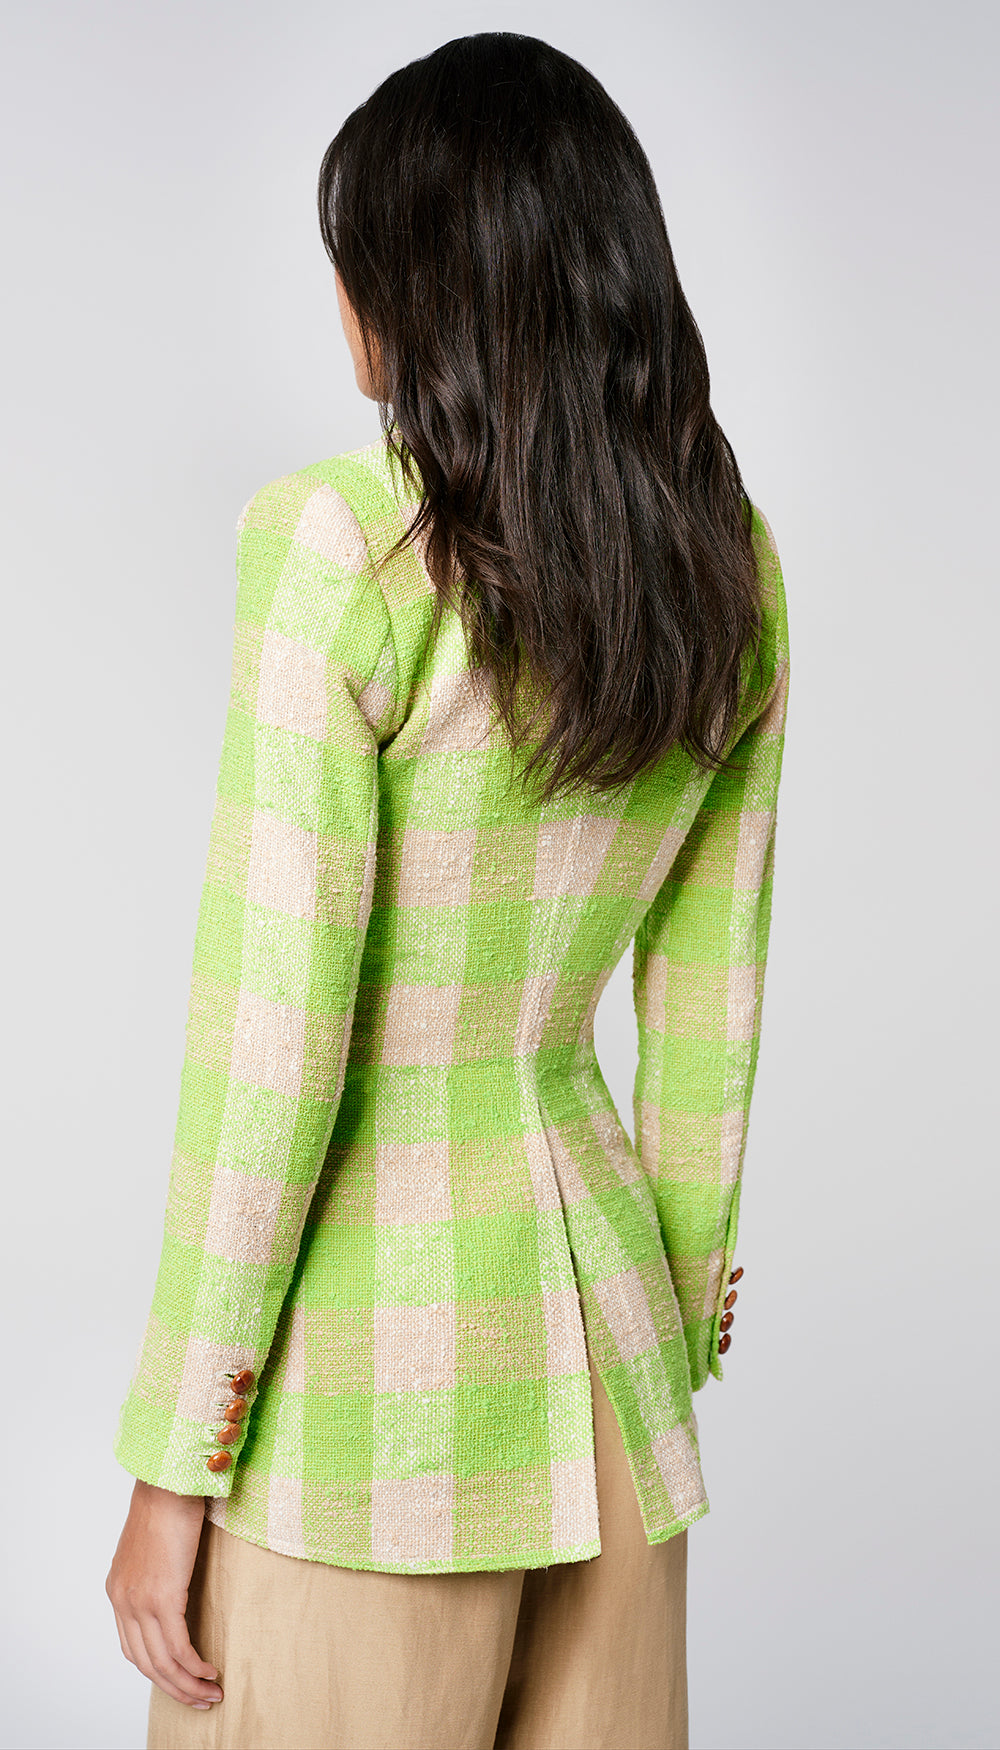 The back of a woman in a green check blazer.